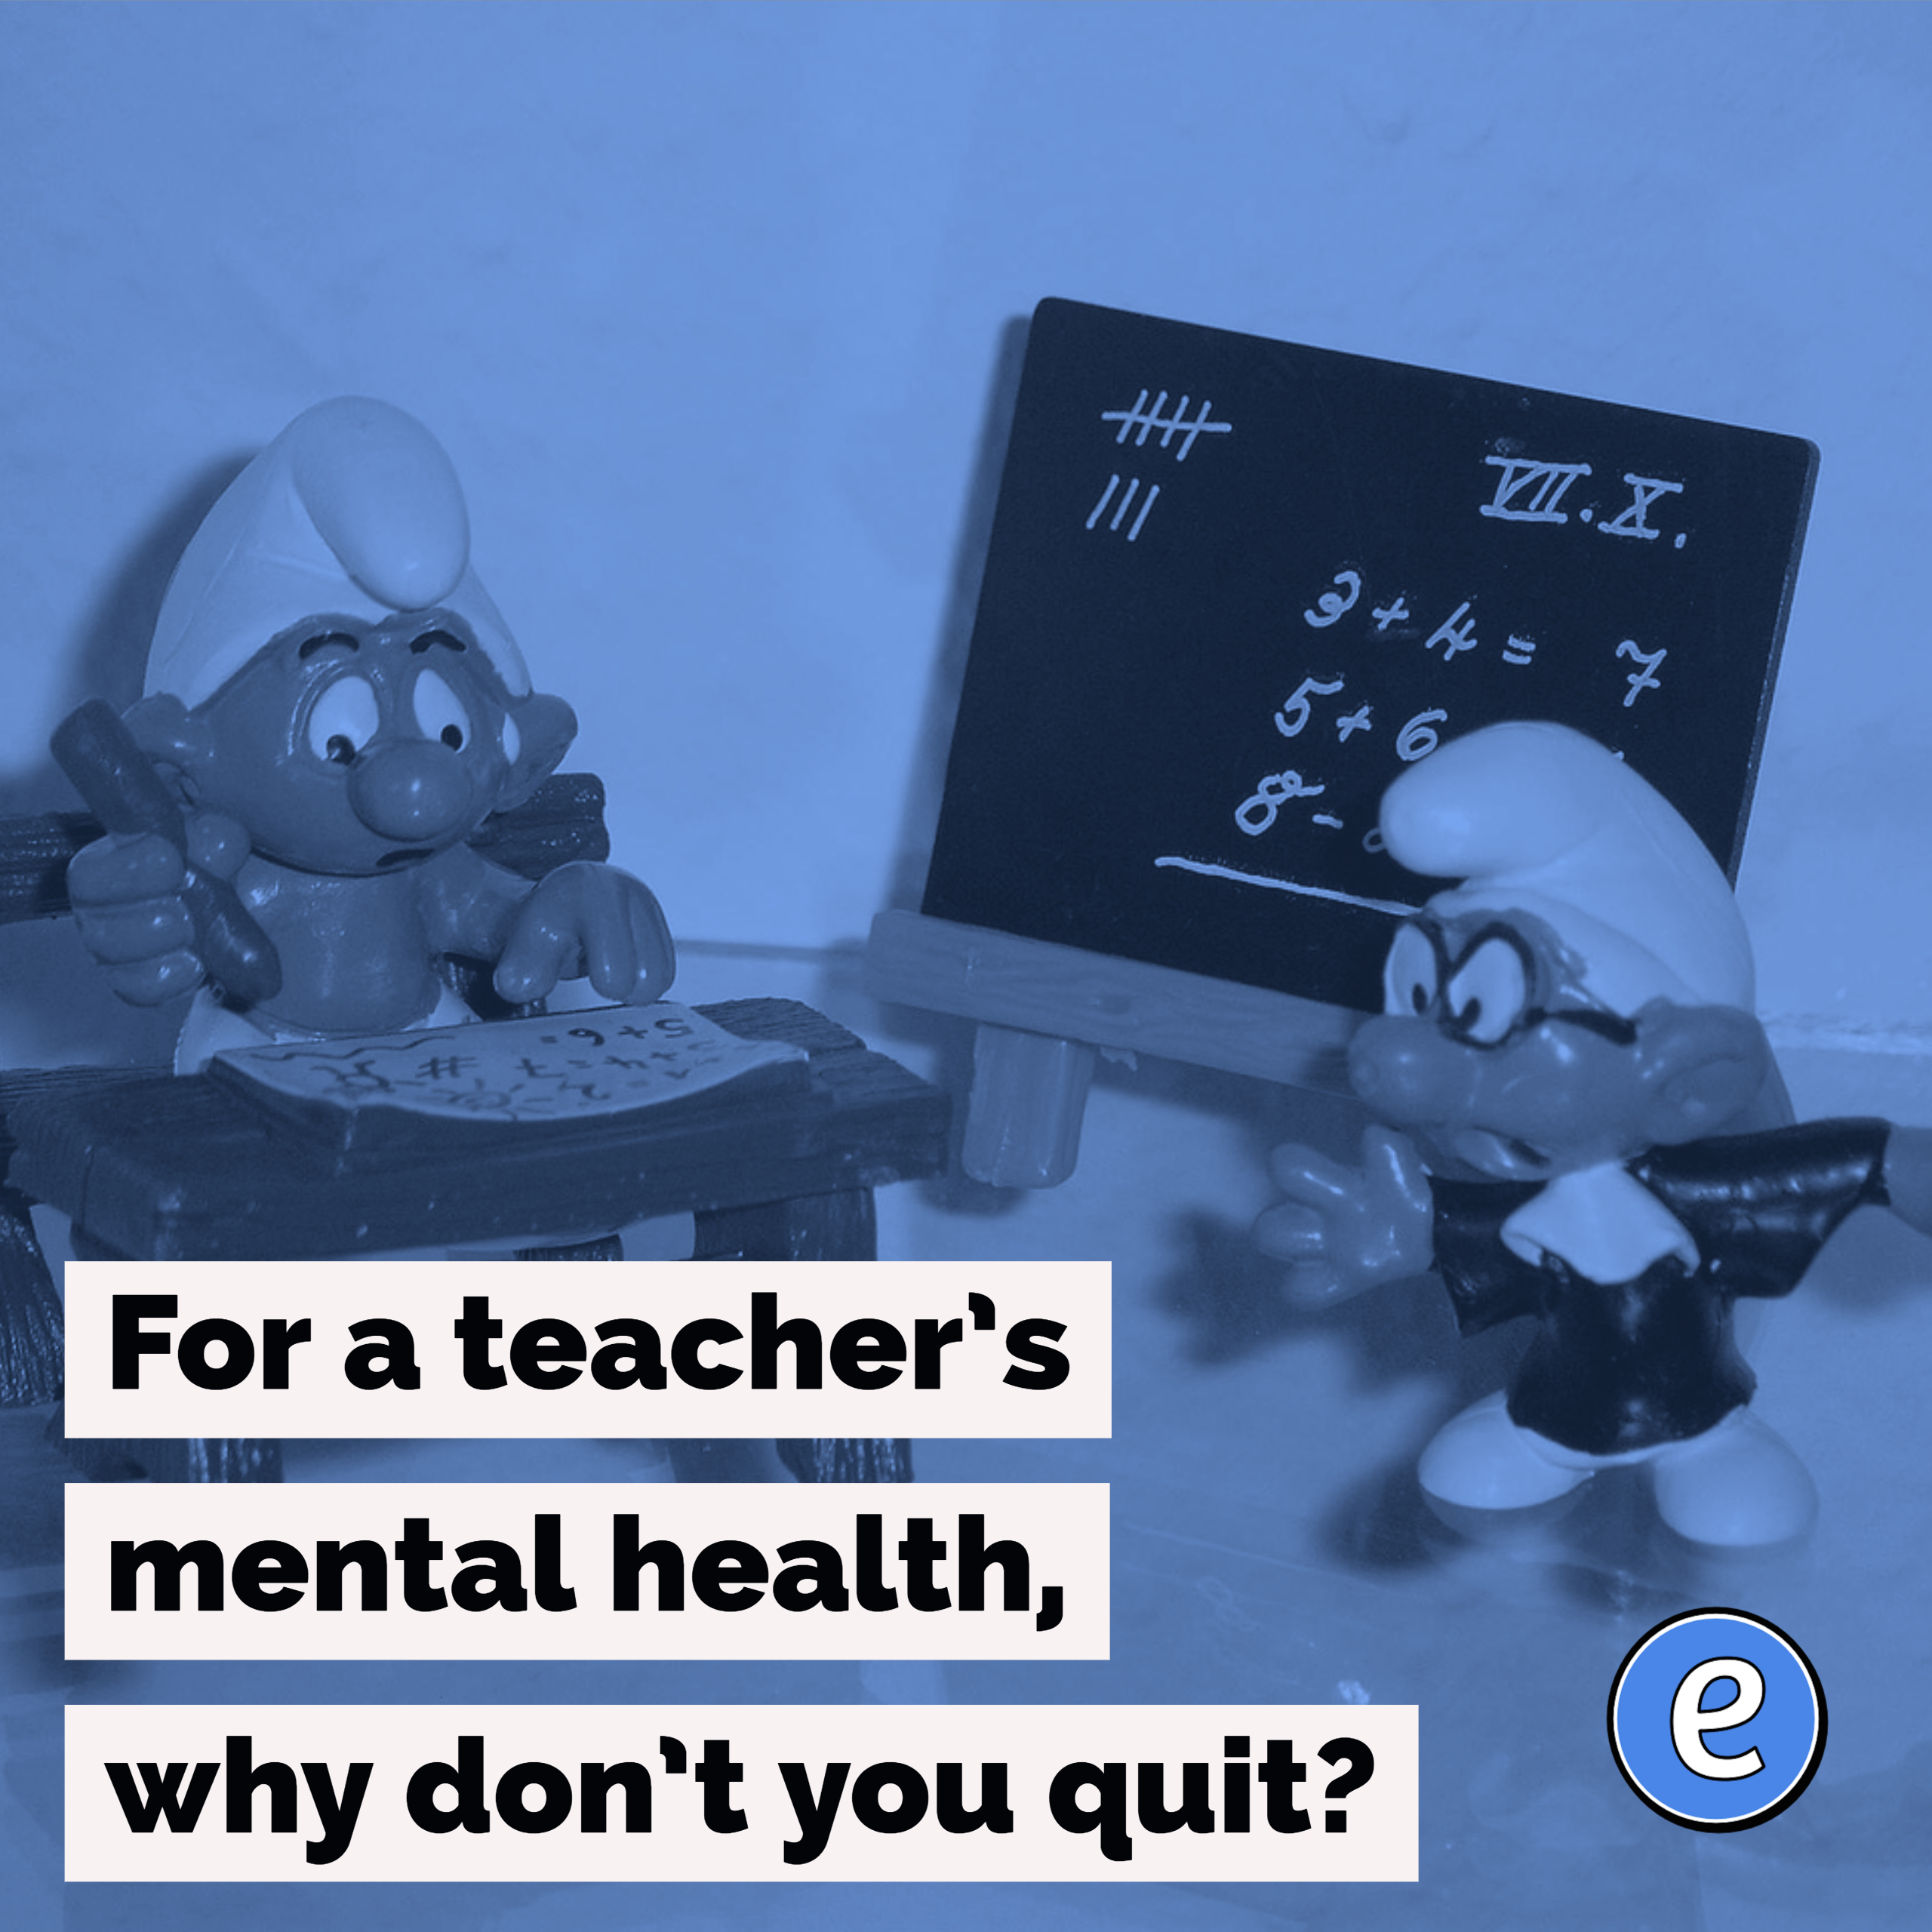 For a teacher’s mental health, why don’t you quit?